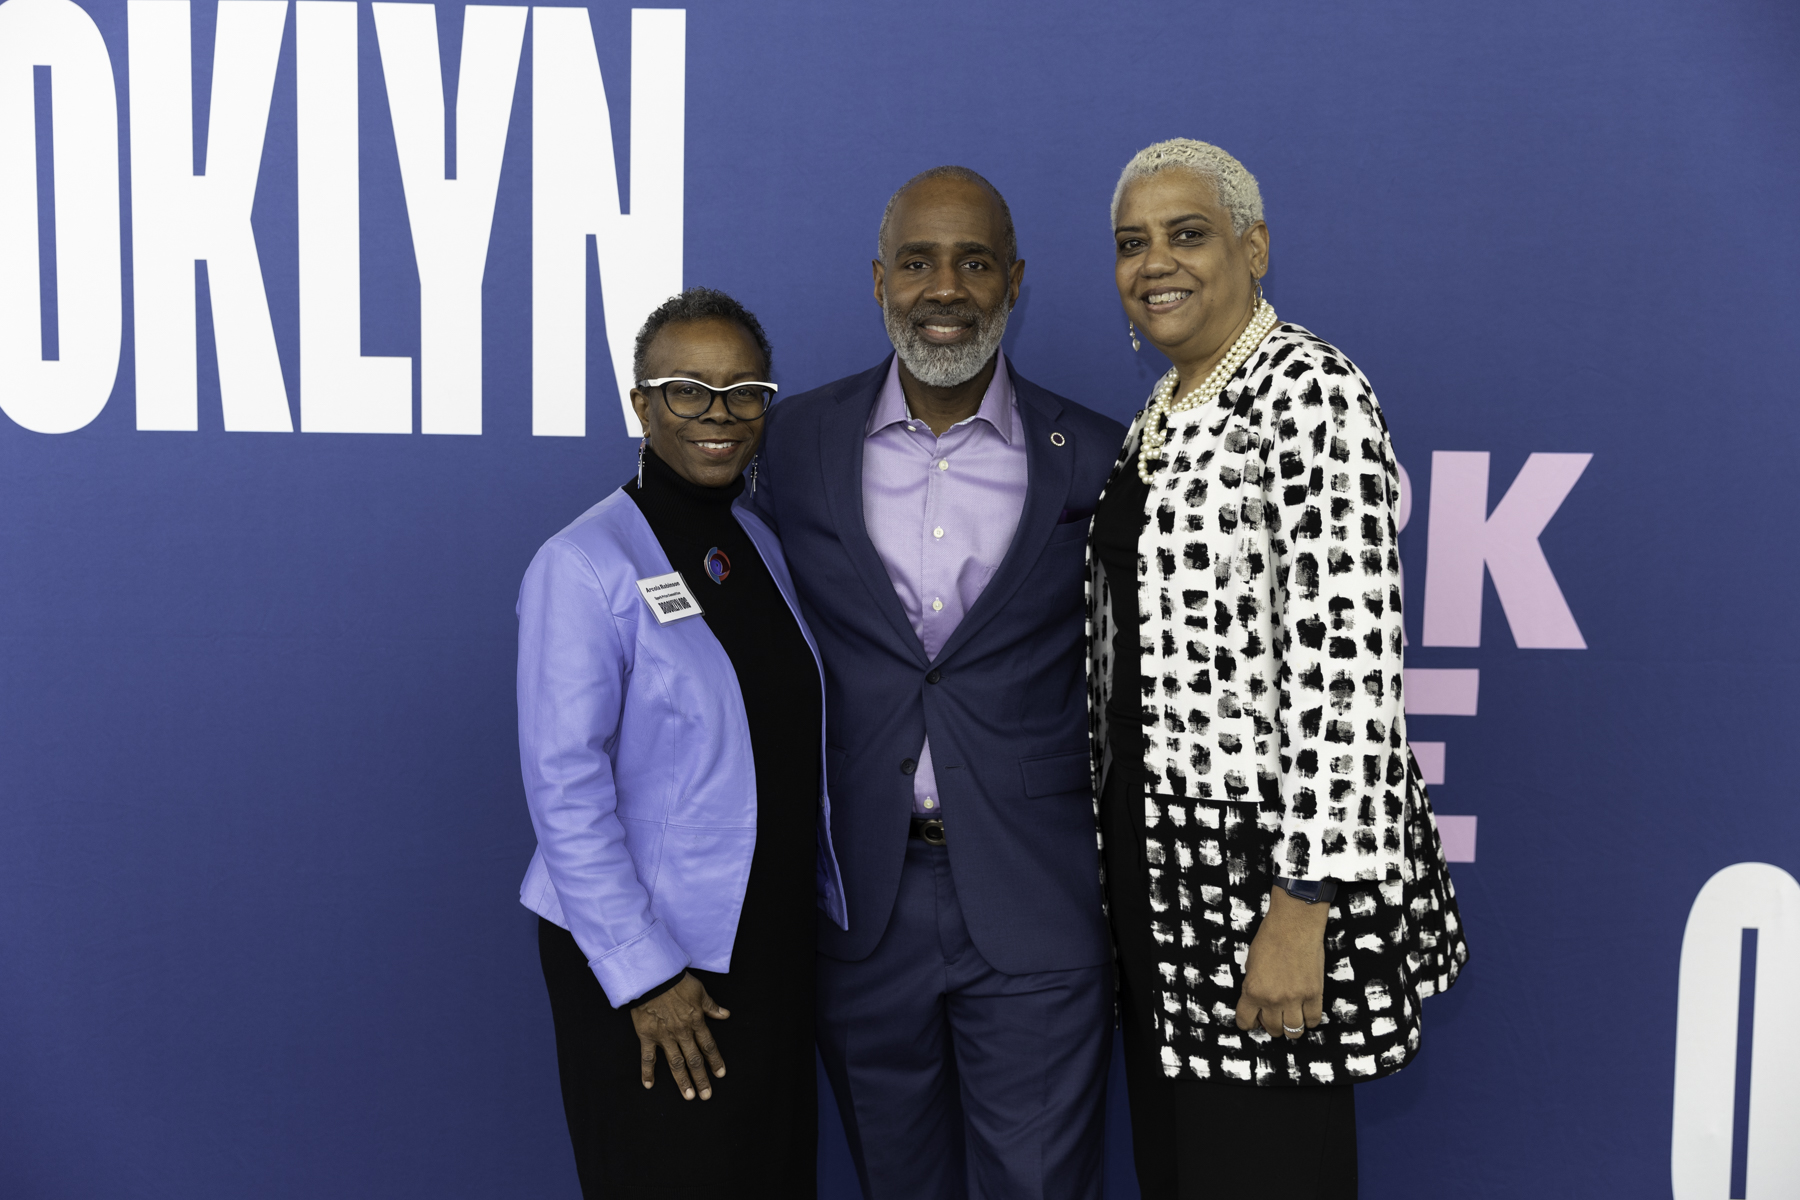 Three individuals posing for a photo at an event with a backdrop that reads "brooklyn.